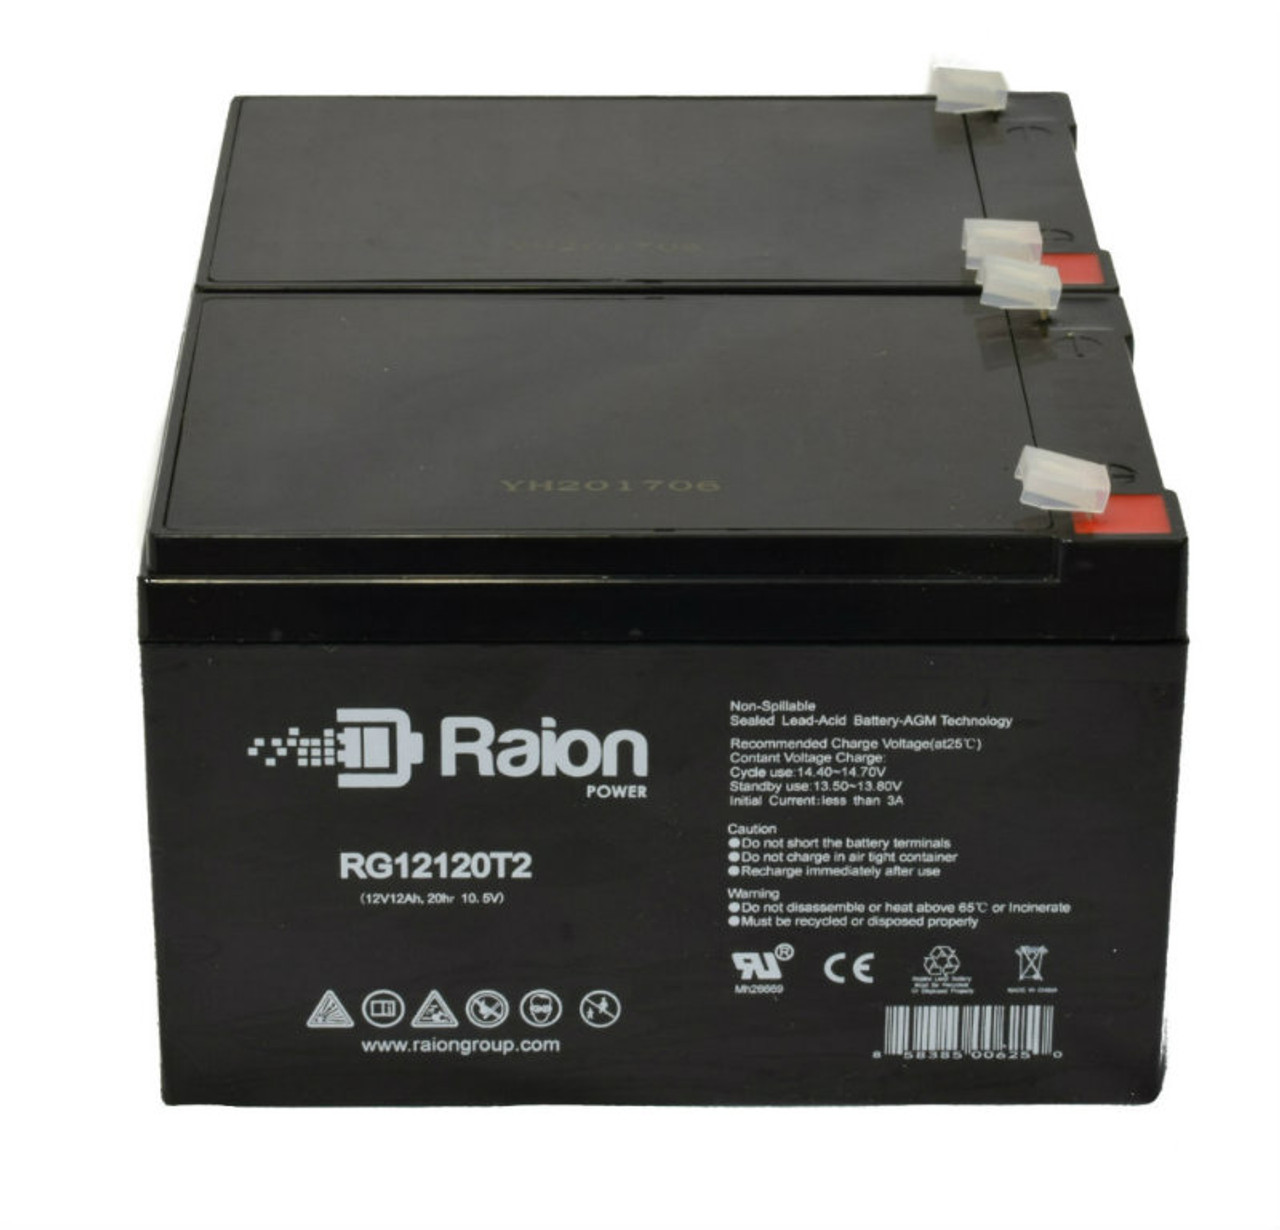 Raion Power 12V 12Ah Non-Spillable Compatible Replacement Battery for Mongoose CX24V450 - (2 Pack)